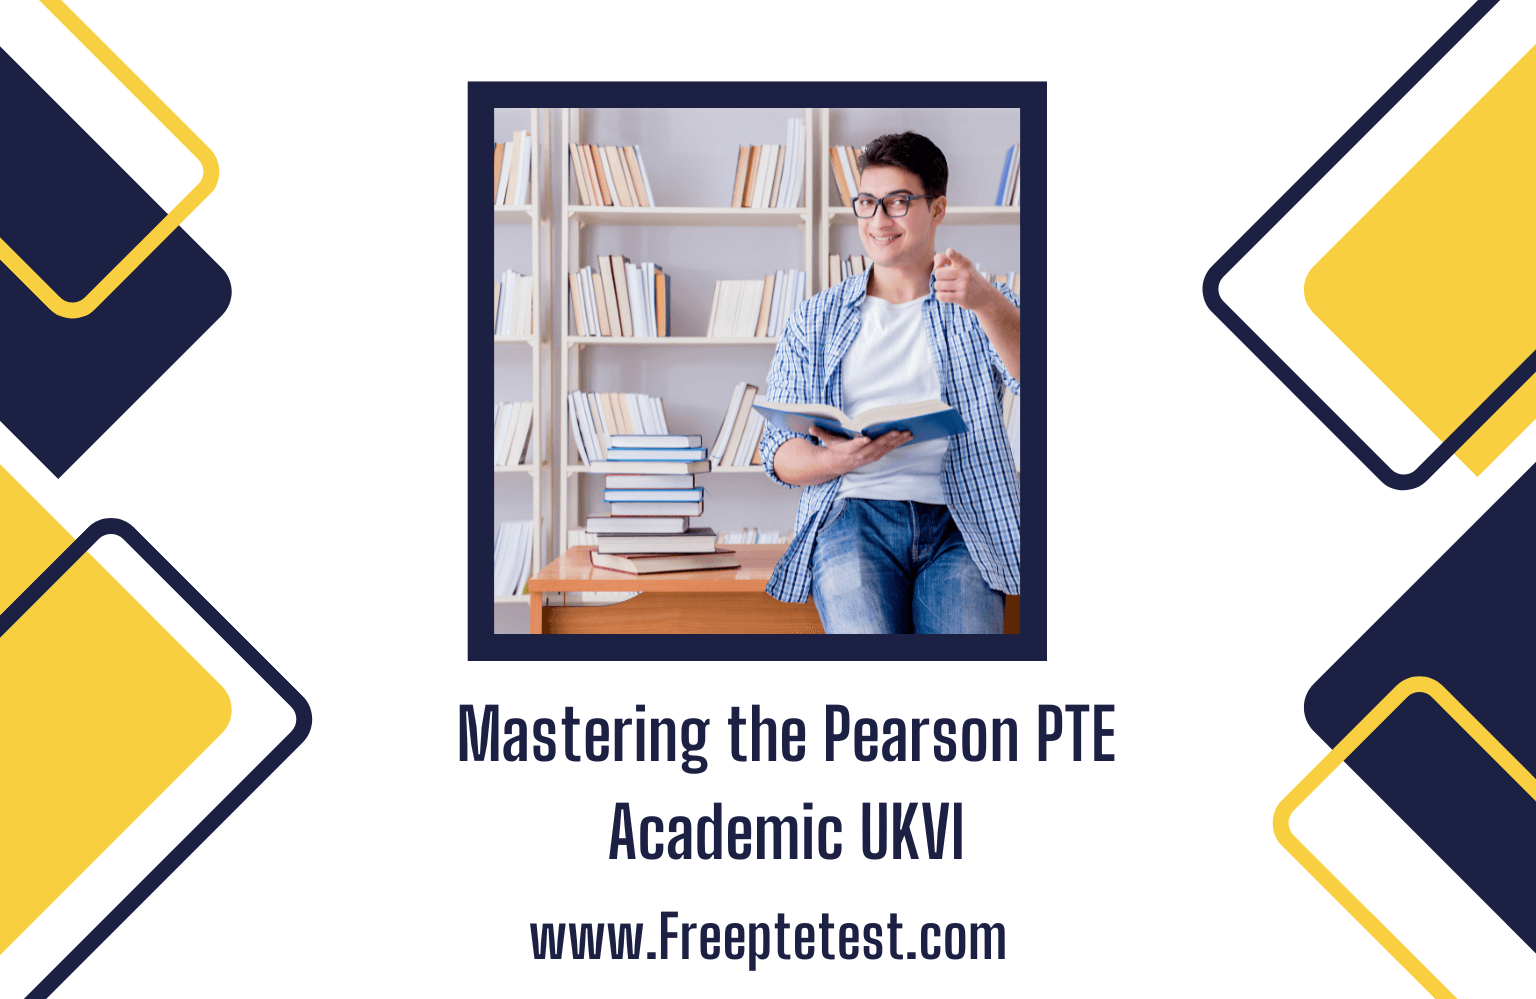 Mastering the Pearson PTE Academic UKVI